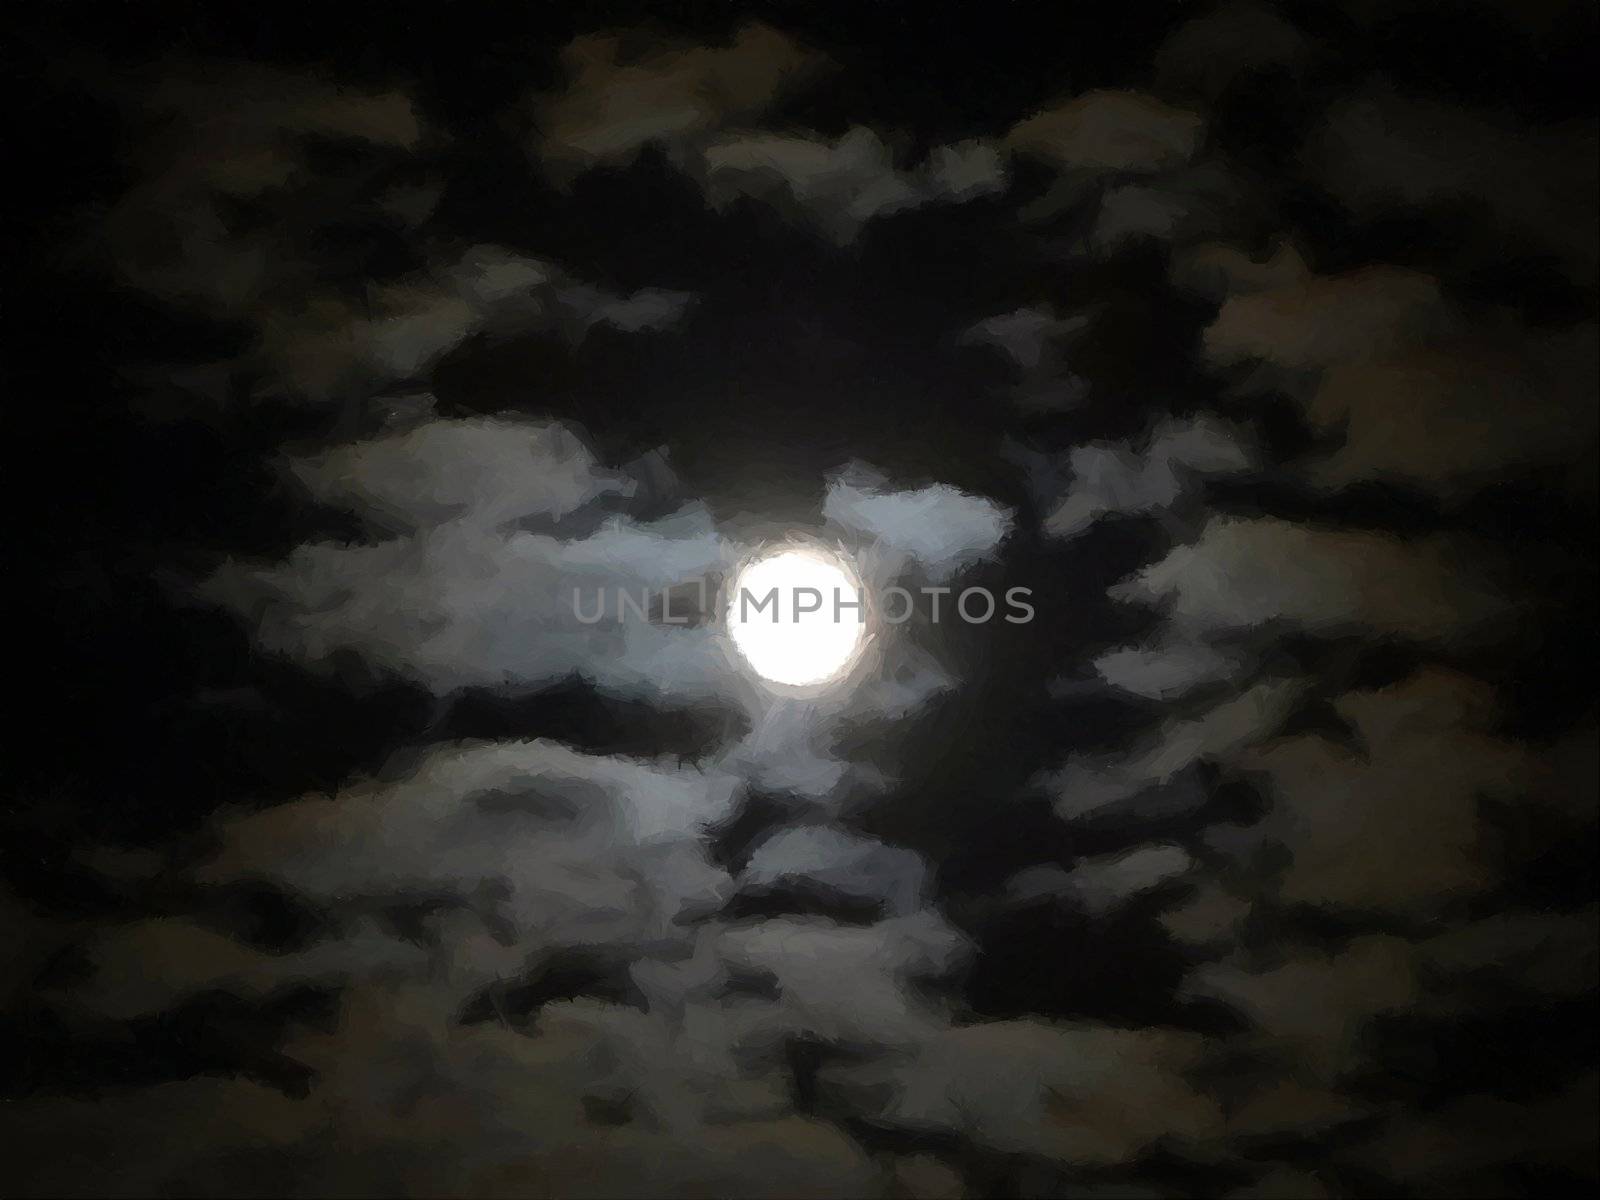 A full moon piercing through the clouds.